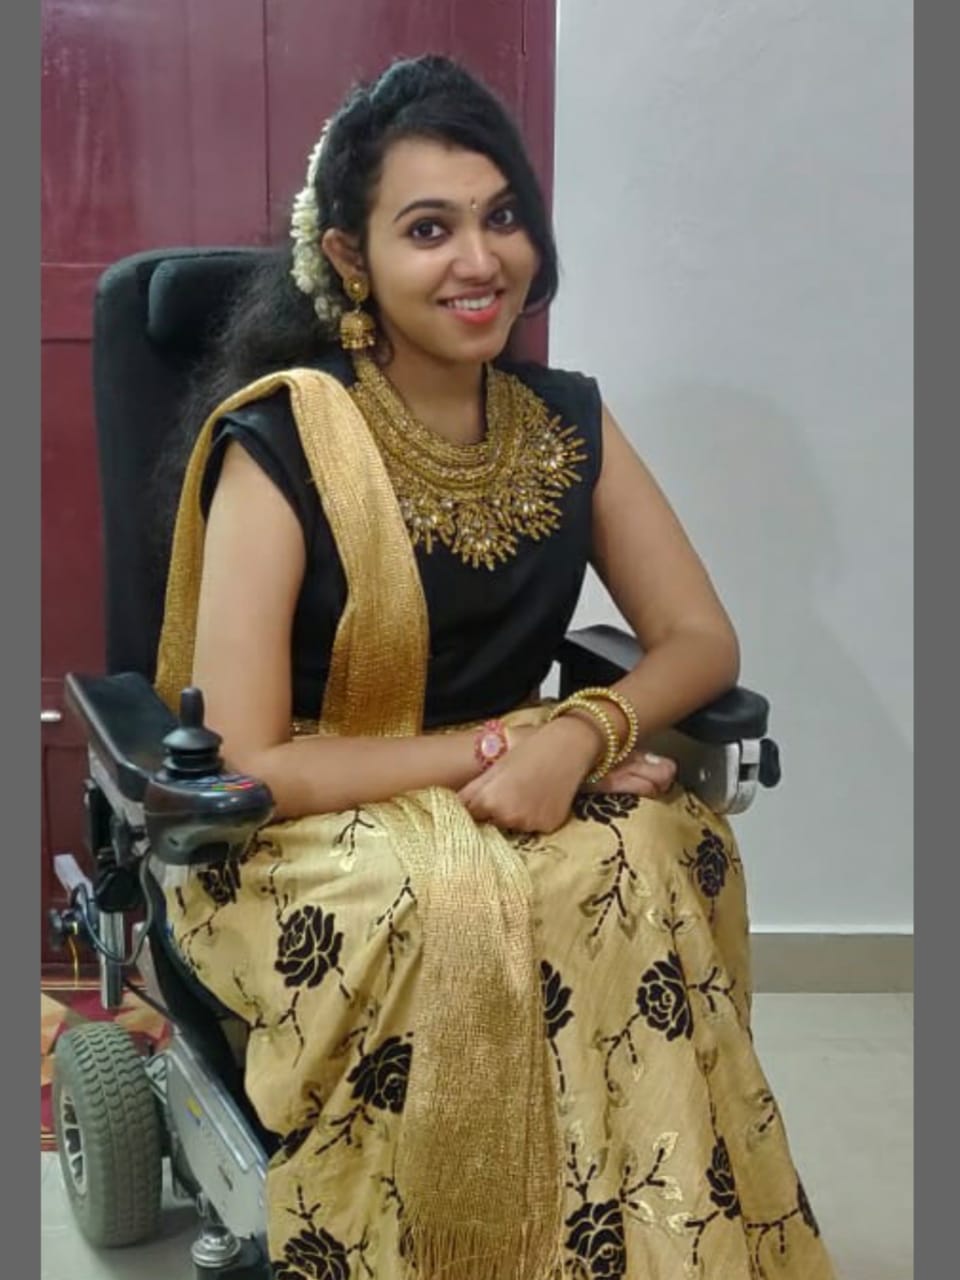 With 5 Million Views, Differently-Abled Kerala Girl Is an Internet Star At  23